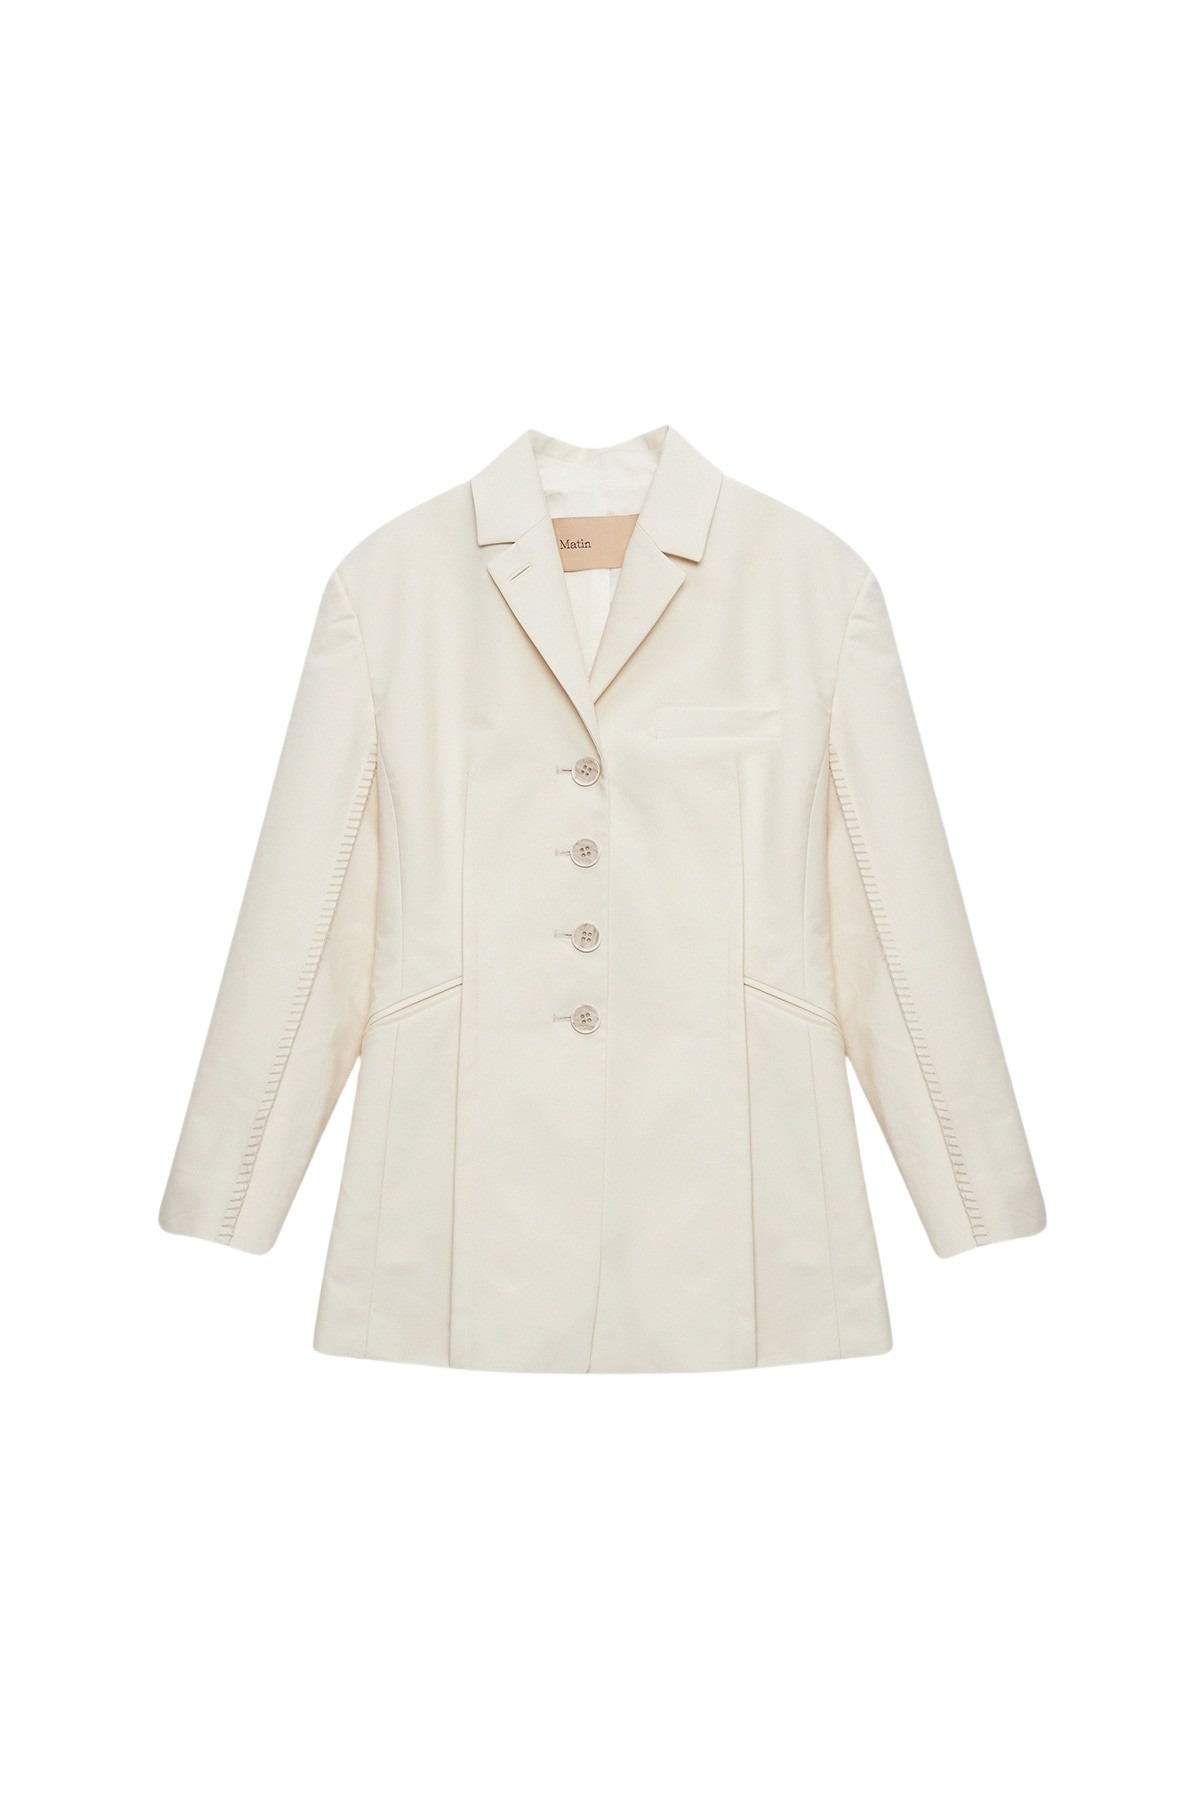 STITCH DETAIL HOURGLASS JACKET IN IVORY